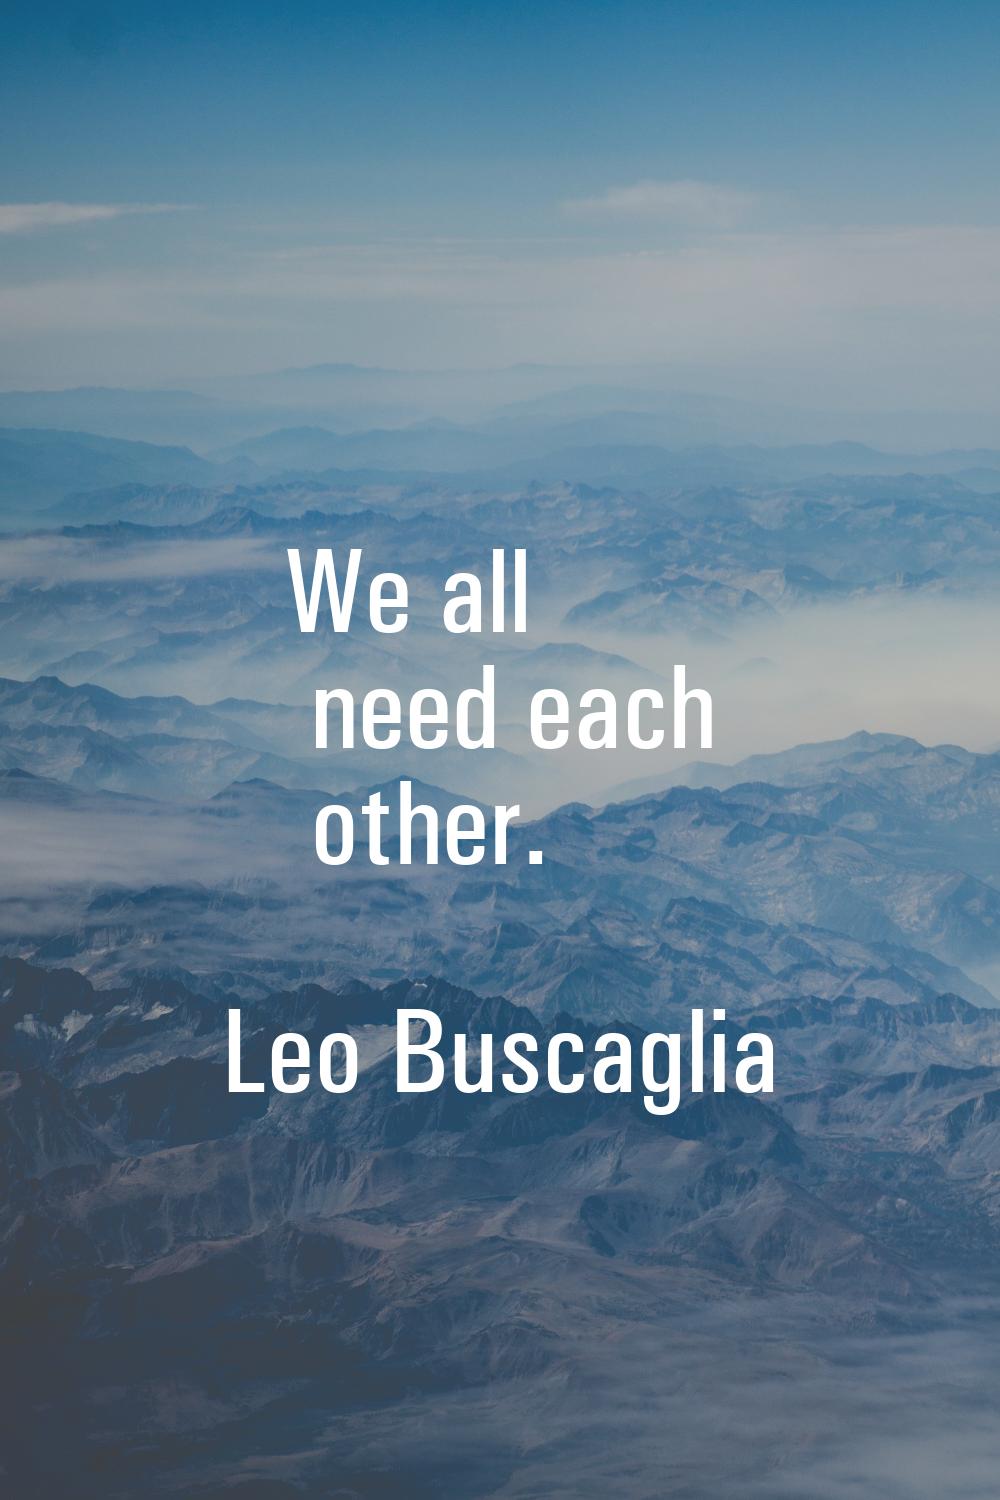 We all need each other.